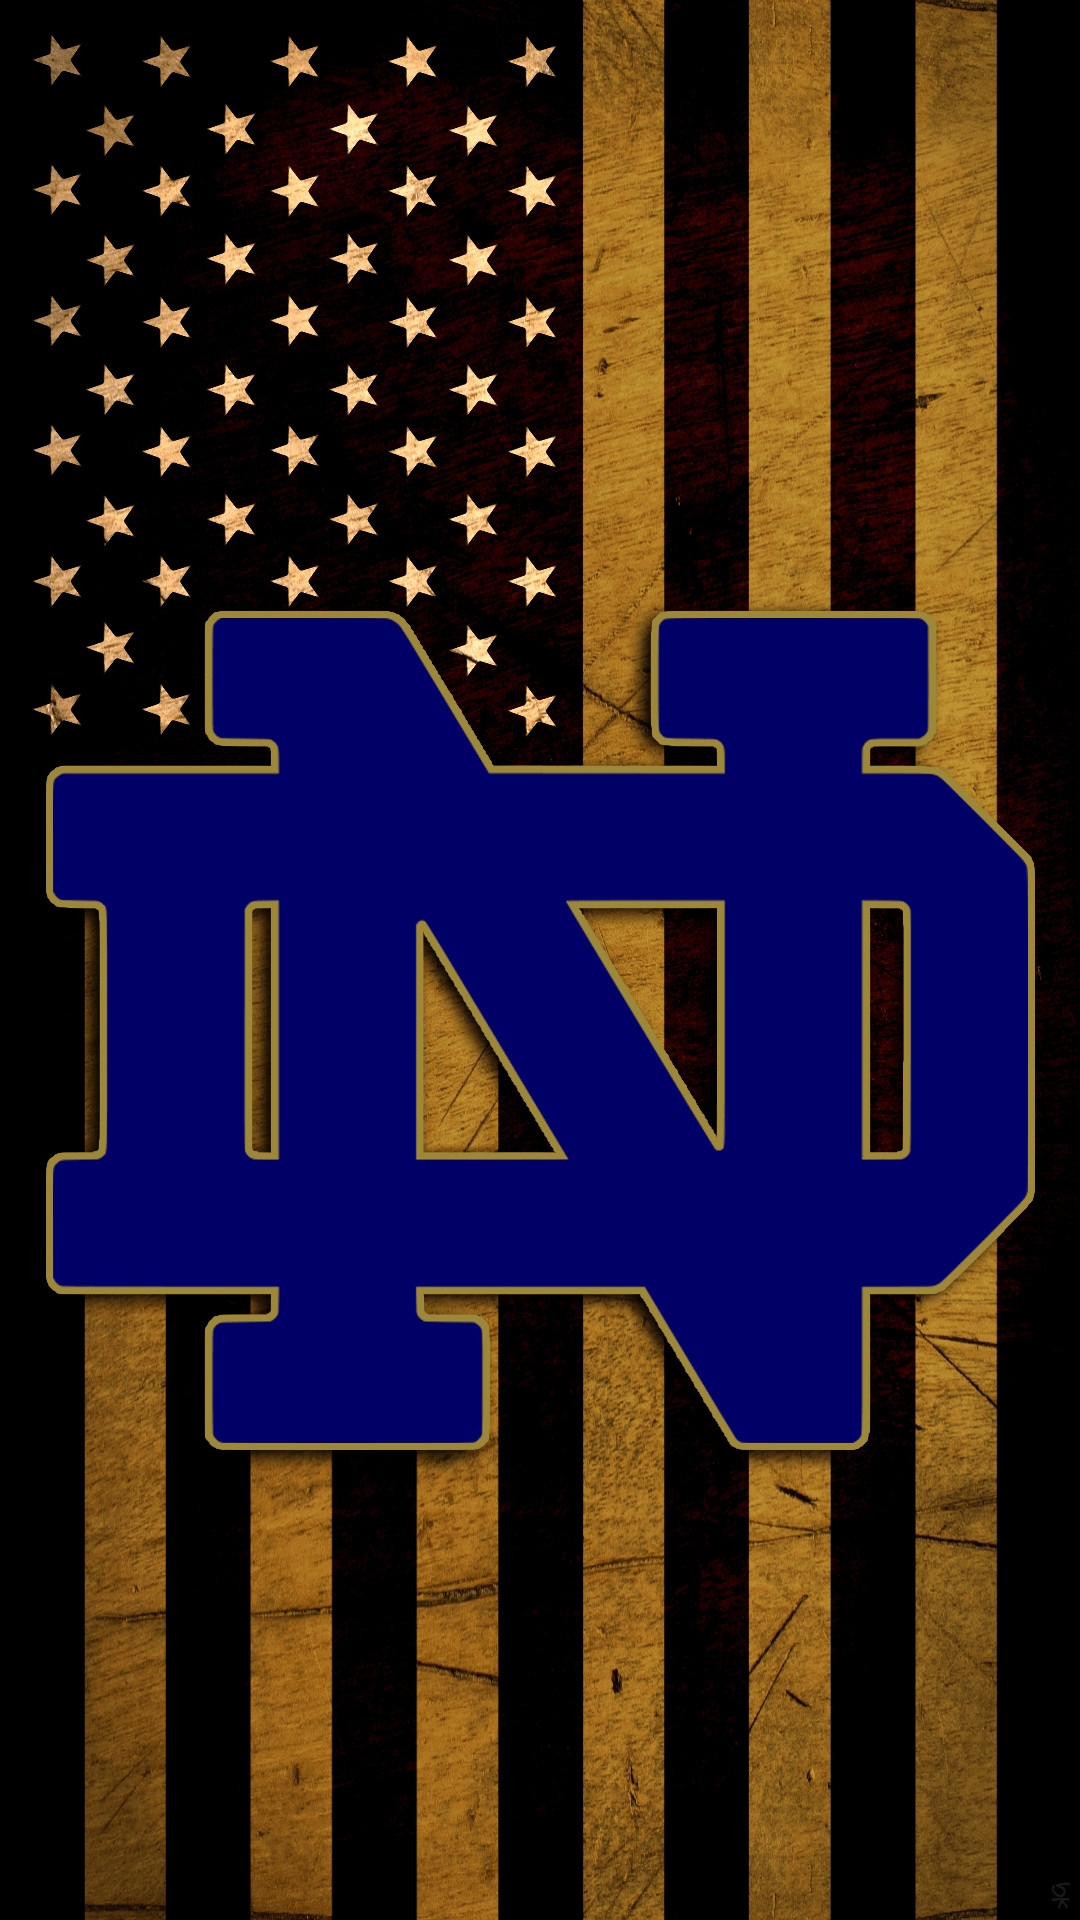 1080x1920 ... Great Pc Backgrounds Hd Notre Dame Iphone Wallpaper in Notre Dame  Wallpaper Iphone Hanksrepublic.com